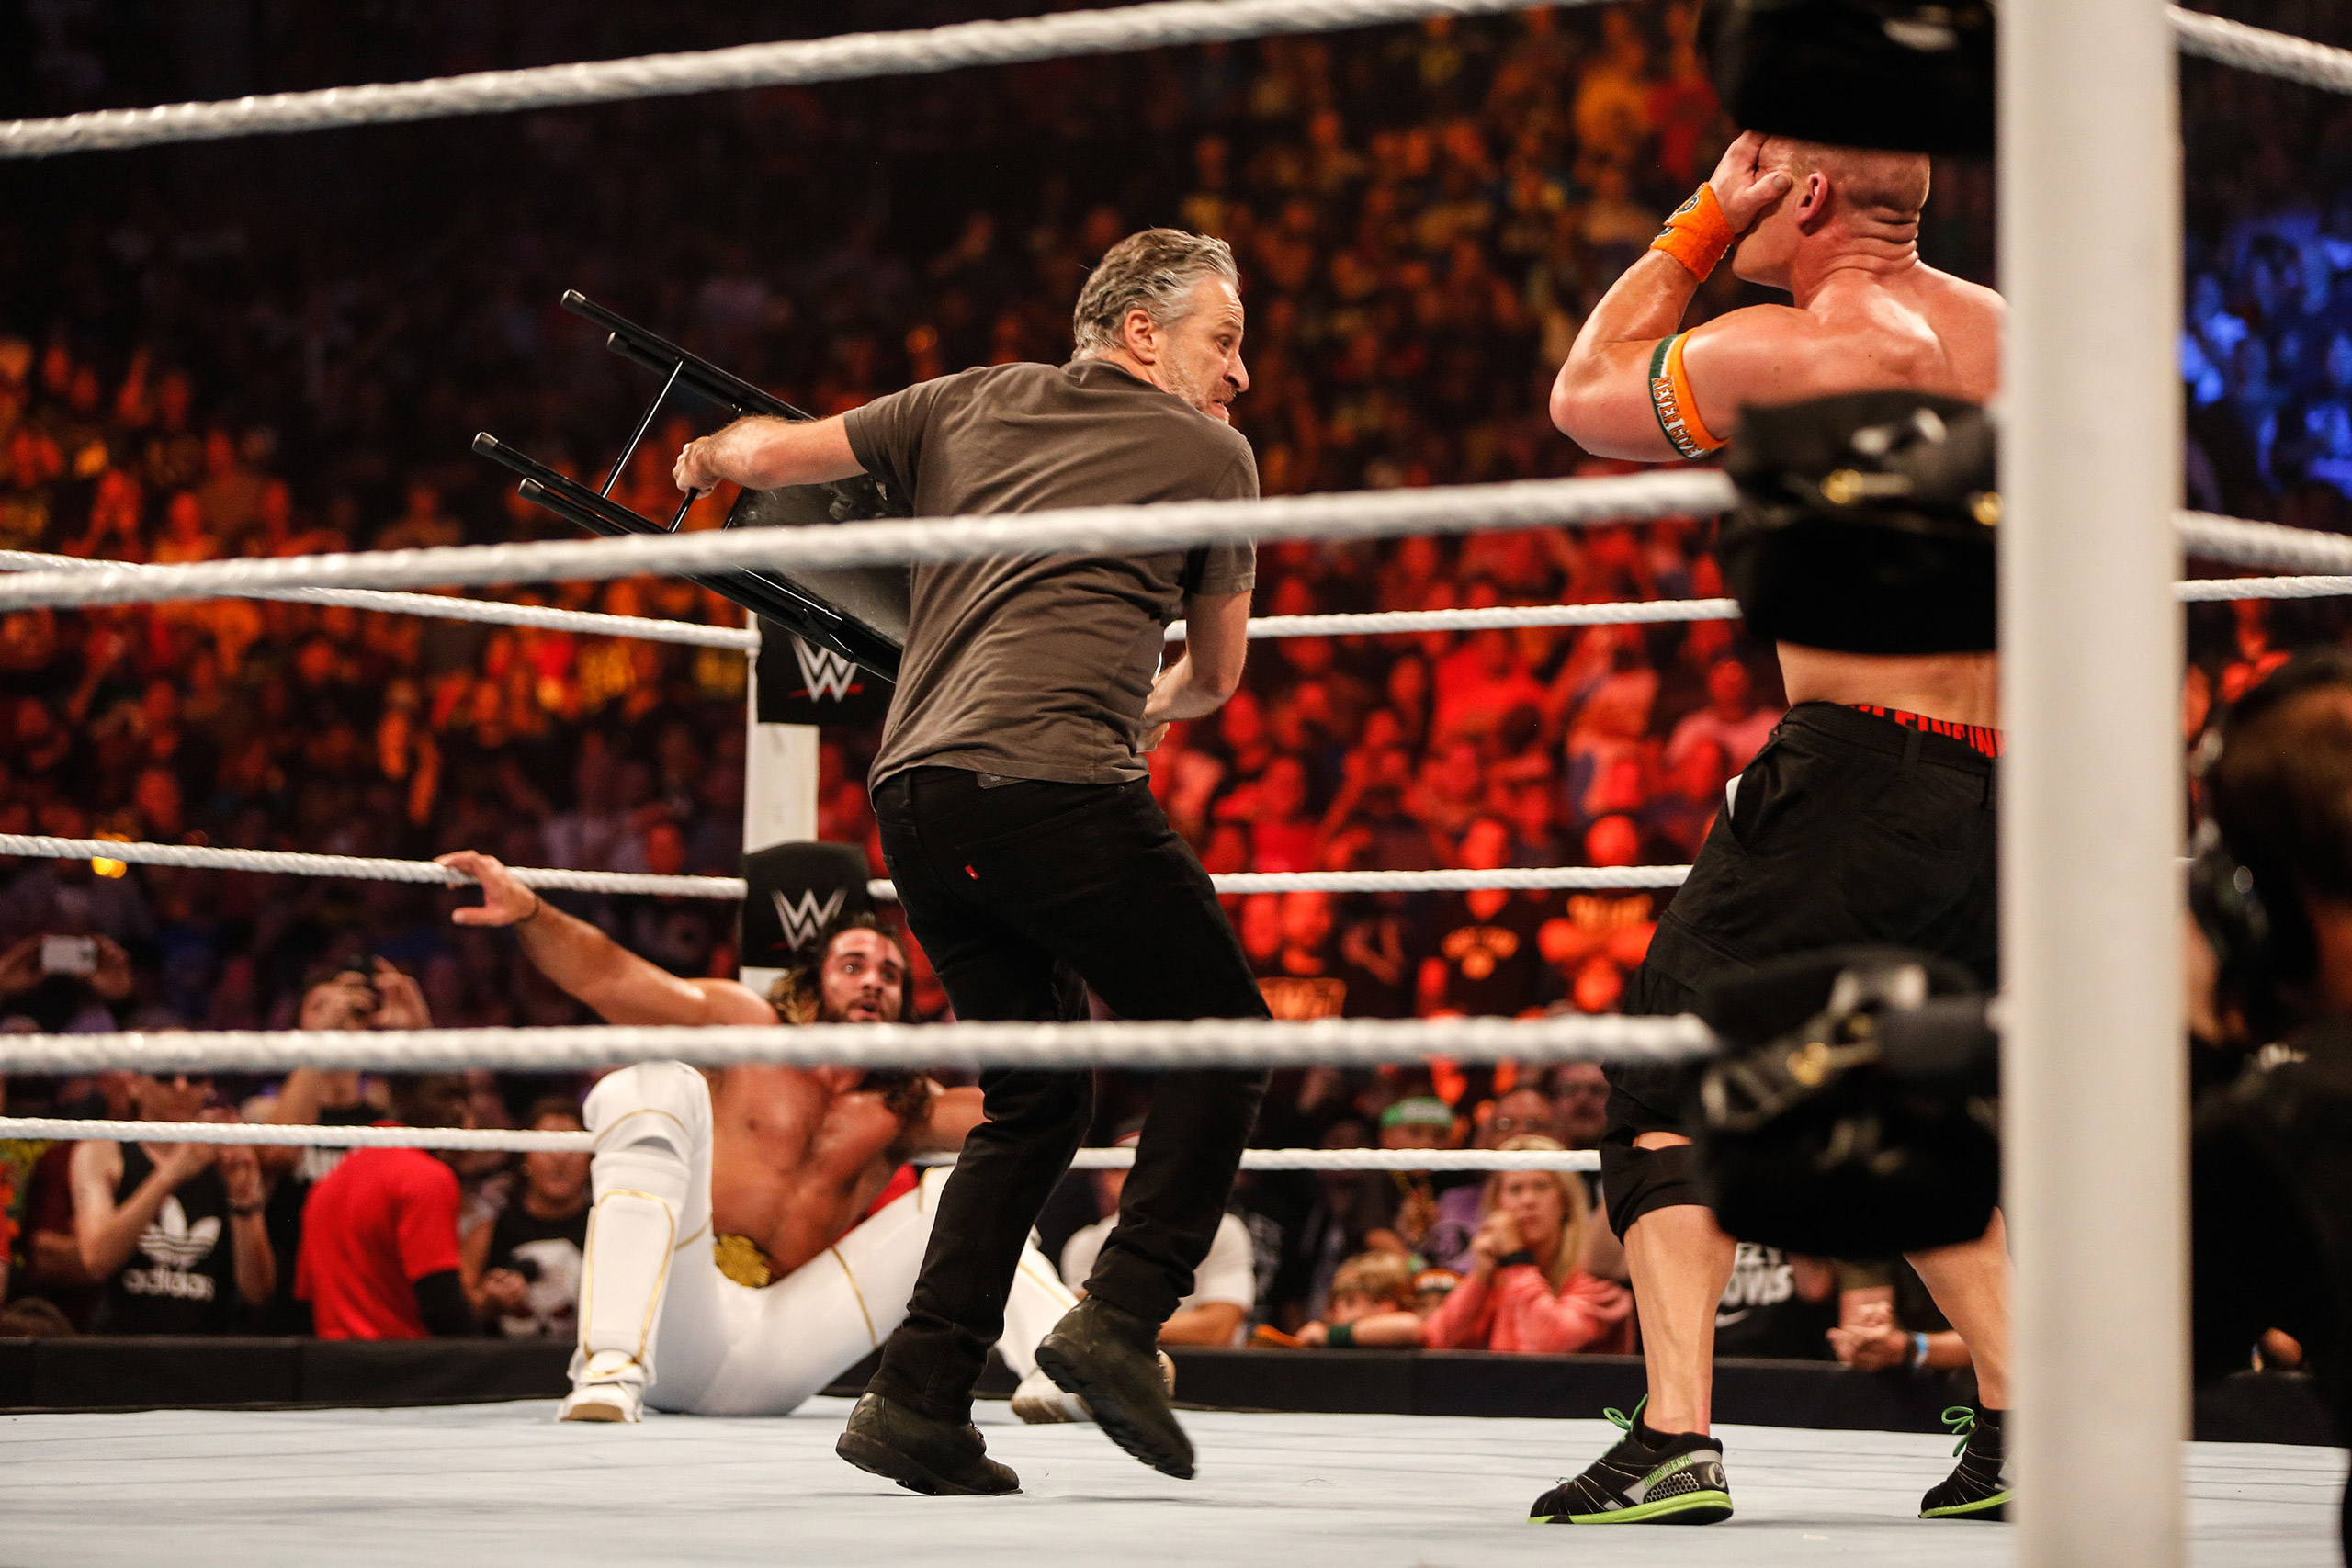 Jon Stewart gets into the action at WWE SummerSlam 2015 Barclays Center in New York City on Aug. 23, 2015. (JP Yim—Getty Images)